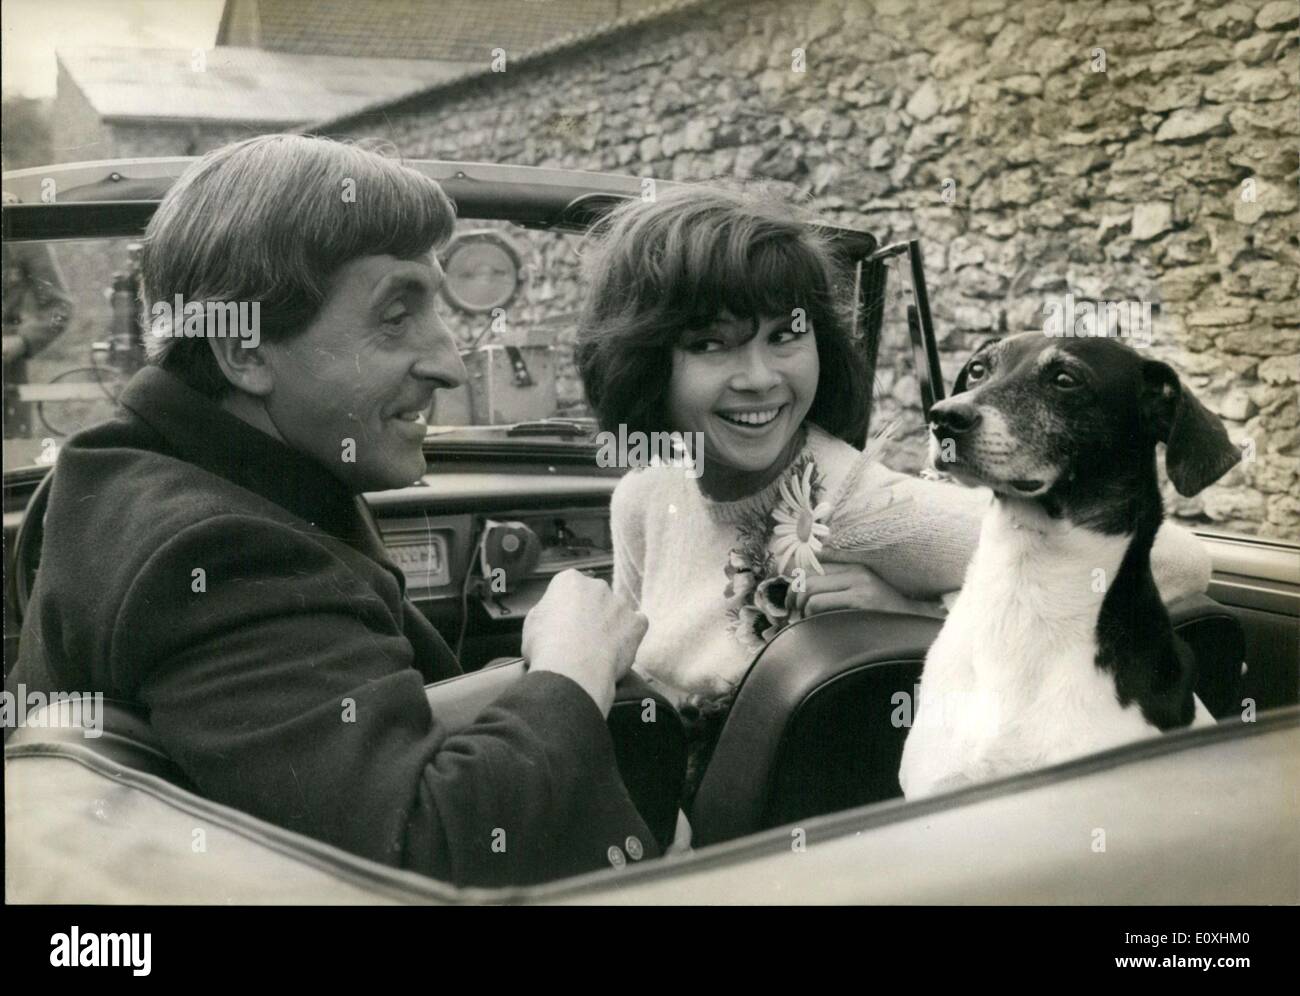 Oct. 22, 1966 - They were filming near Rambouillet. Stock Photo